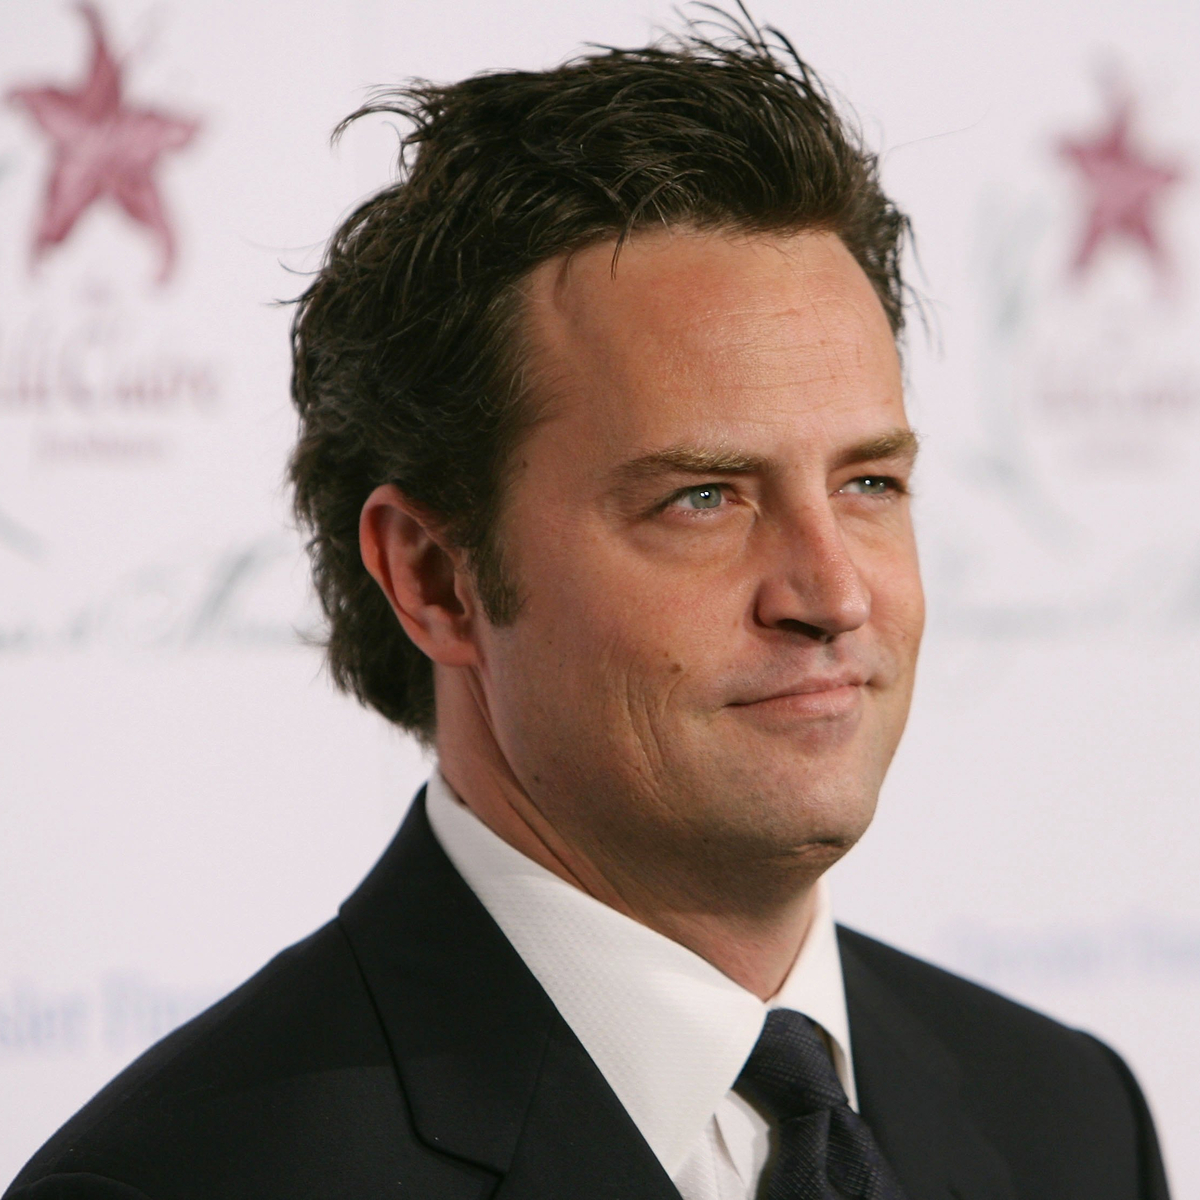 Matthew Perry Reflected on “Ups & Downs” in Life One Year Before Death